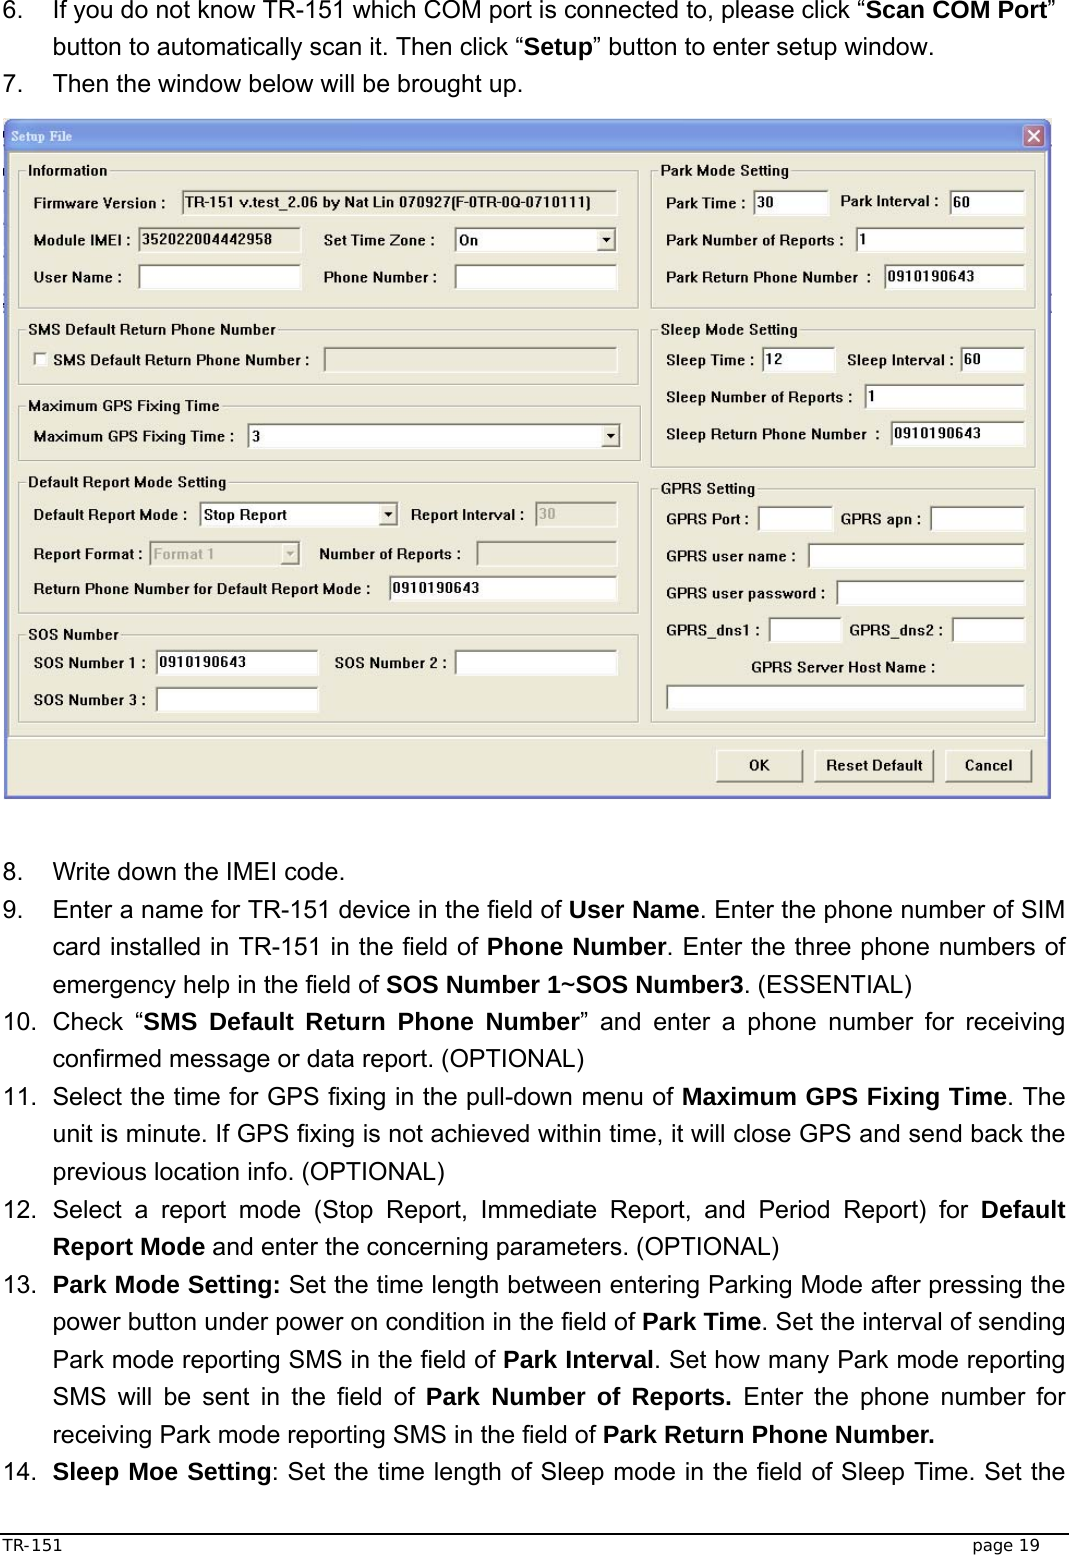  TR-151   page 19 6.  If you do not know TR-151 which COM port is connected to, please click “Scan COM Port” button to automatically scan it. Then click “Setup” button to enter setup window. 7.  Then the window below will be brought up.                     8.  Write down the IMEI code.   9.  Enter a name for TR-151 device in the field of User Name. Enter the phone number of SIM card installed in TR-151 in the field of Phone Number. Enter the three phone numbers of emergency help in the field of SOS Number 1~SOS Number3. (ESSENTIAL) 10. Check “SMS Default Return Phone Number” and enter a phone number for receiving confirmed message or data report. (OPTIONAL) 11.  Select the time for GPS fixing in the pull-down menu of Maximum GPS Fixing Time. The unit is minute. If GPS fixing is not achieved within time, it will close GPS and send back the previous location info. (OPTIONAL) 12. Select a report mode (Stop Report, Immediate Report, and Period Report) for Default Report Mode and enter the concerning parameters. (OPTIONAL)     13.  Park Mode Setting: Set the time length between entering Parking Mode after pressing the power button under power on condition in the field of Park Time. Set the interval of sending Park mode reporting SMS in the field of Park Interval. Set how many Park mode reporting SMS will be sent in the field of Park Number of Reports. Enter the phone number for receiving Park mode reporting SMS in the field of Park Return Phone Number. 14.  Sleep Moe Setting: Set the time length of Sleep mode in the field of Sleep Time. Set the 